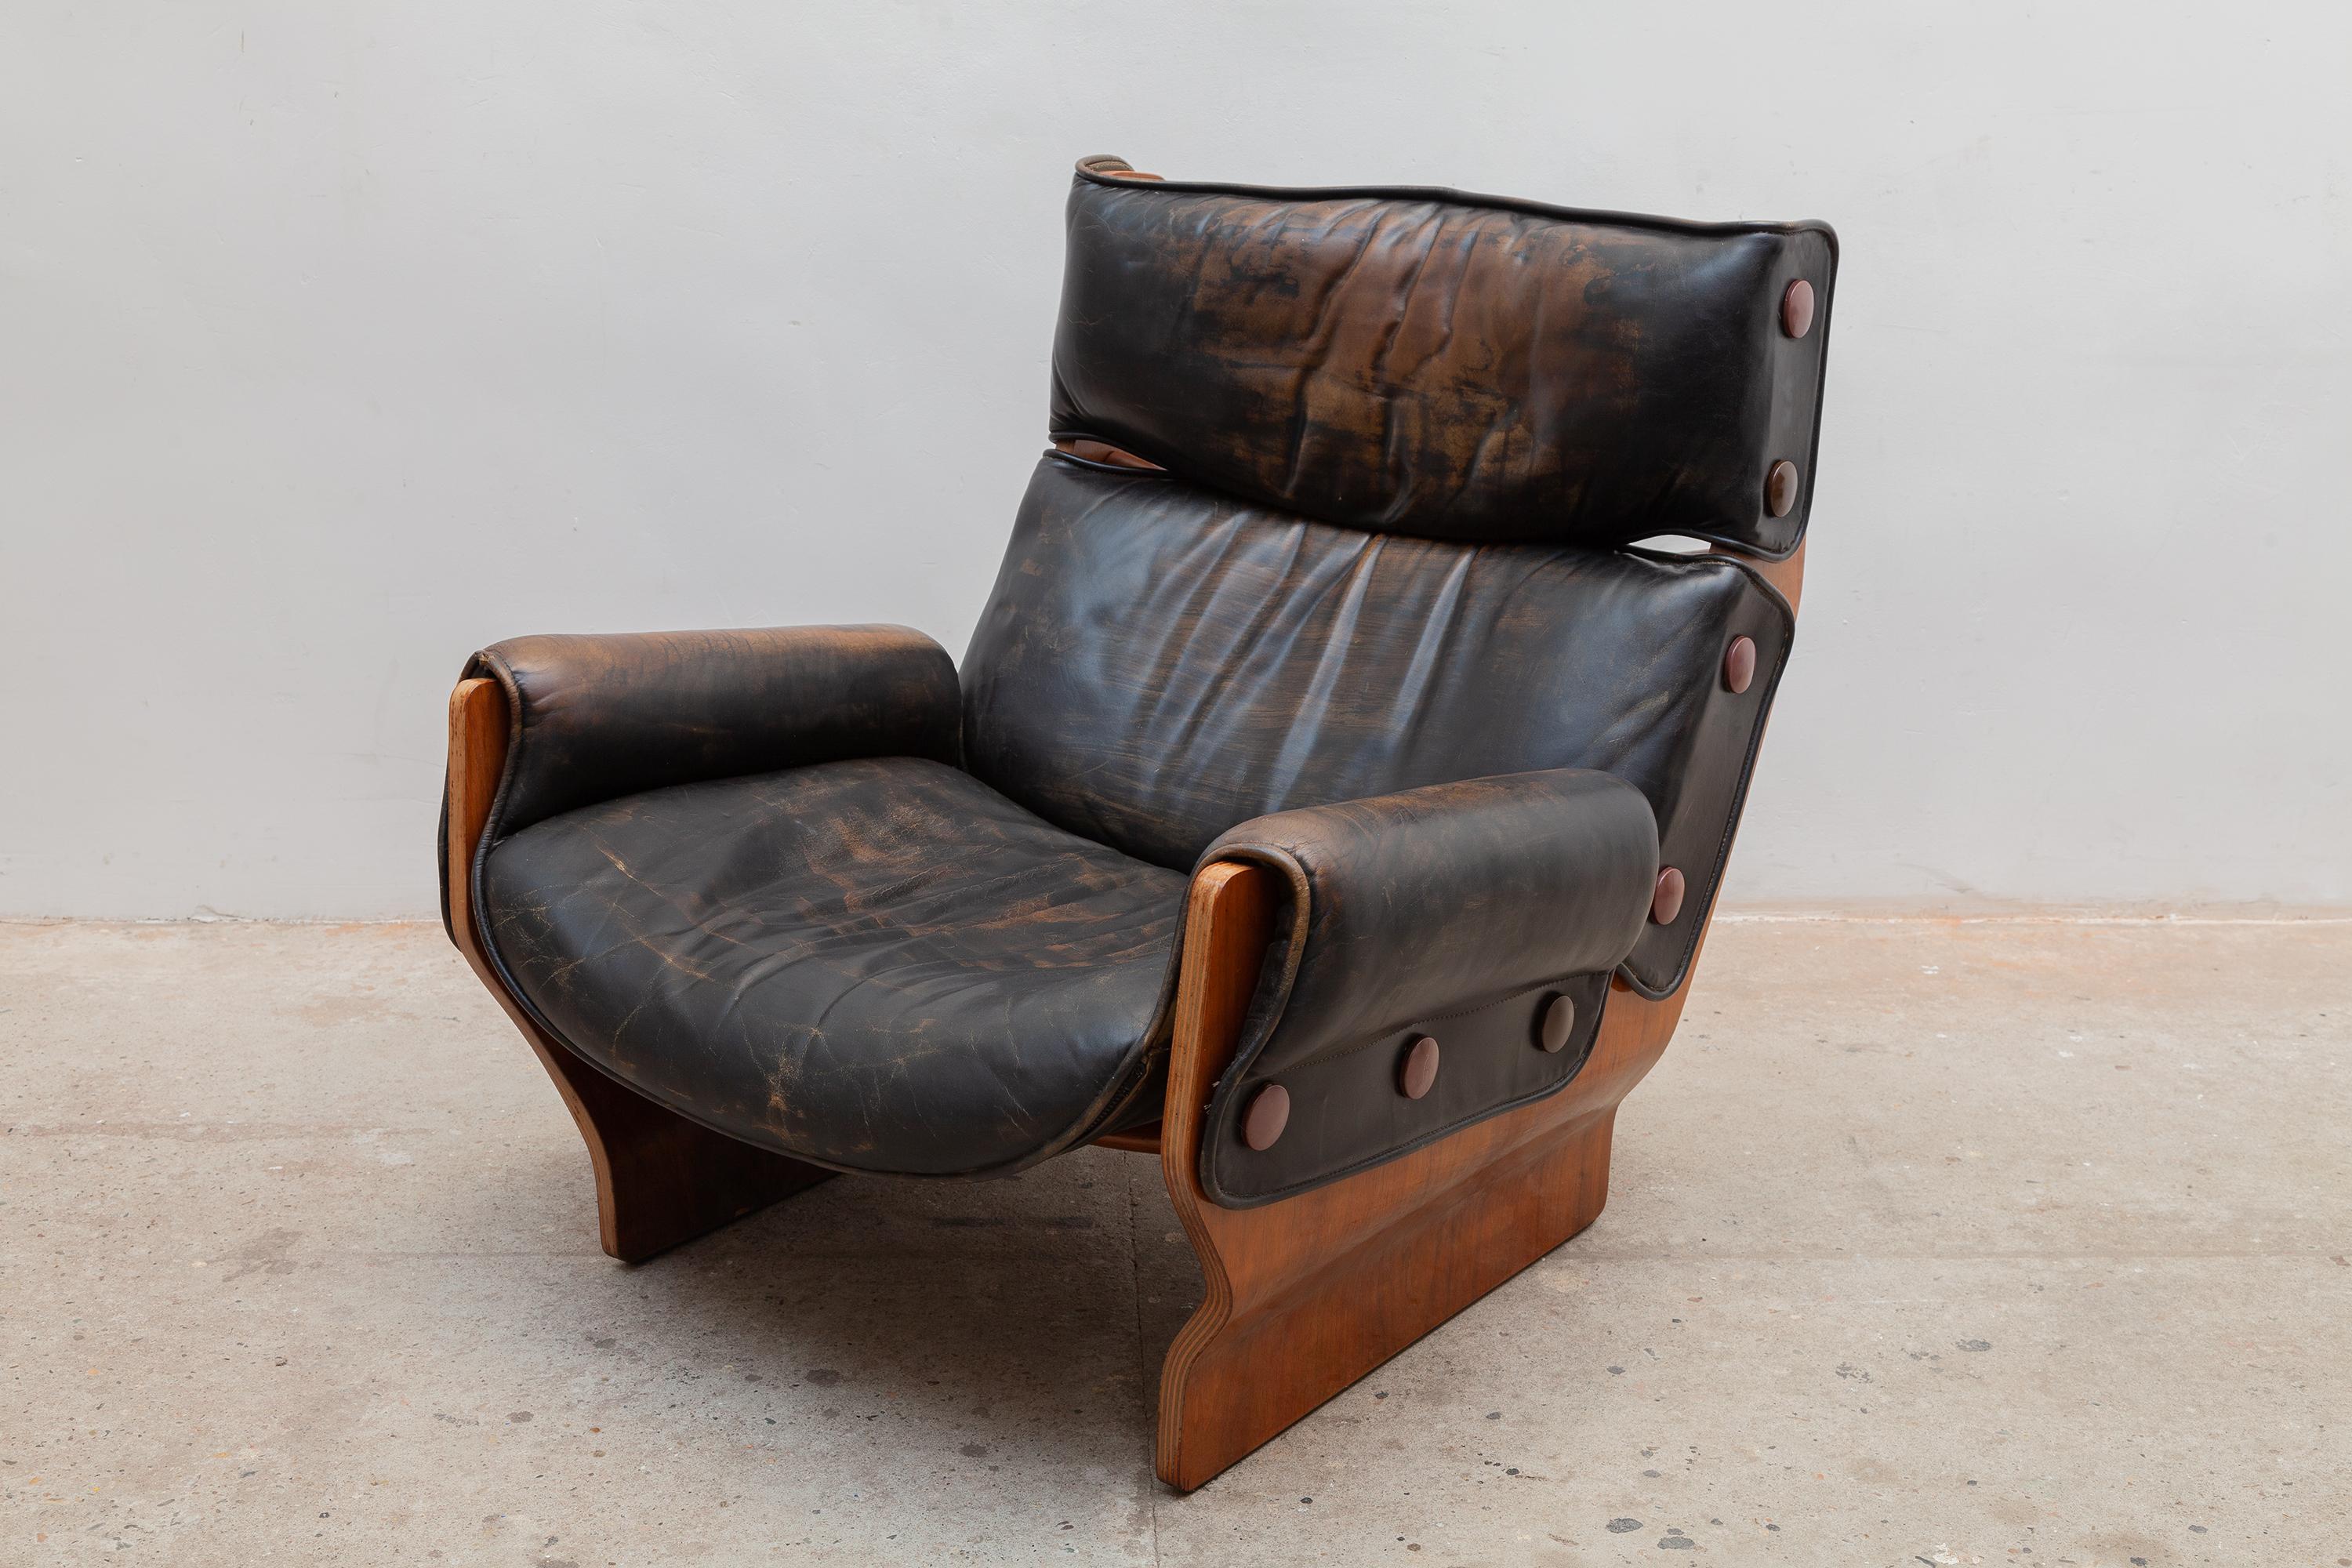 Original P110 'Canada' armchair from the 1960s by Osvaldo Borsani for Tecno, Italy. Wooden frame with original chocolate leather upholstery with a very nice patina. Borsani designed this lounge chair in 1965, part of the slender line a clever